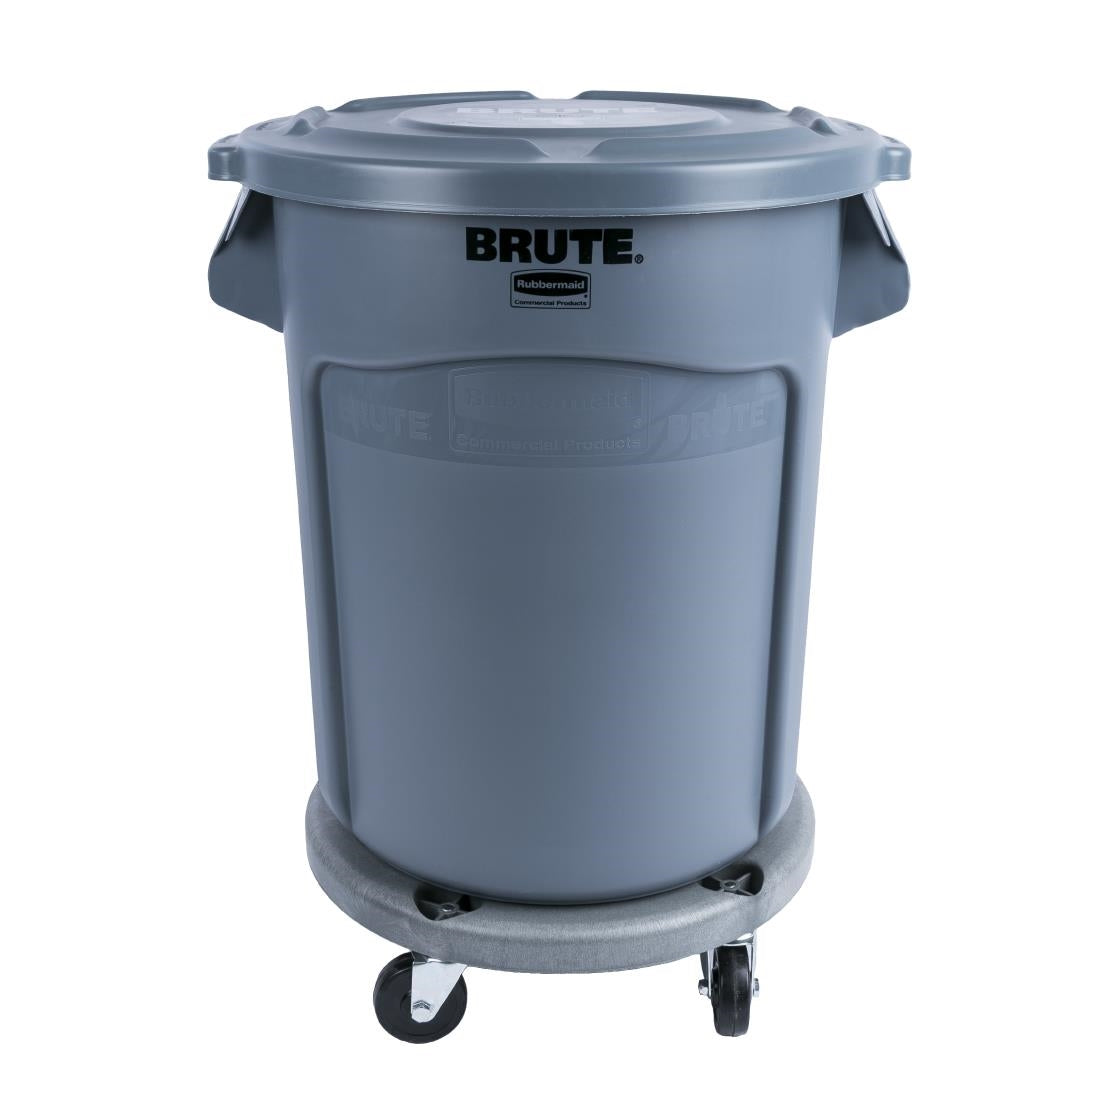 L638 Rubbermaid Brute Utility Container 75.7Ltr Grey JD Catering Equipment Solutions Ltd